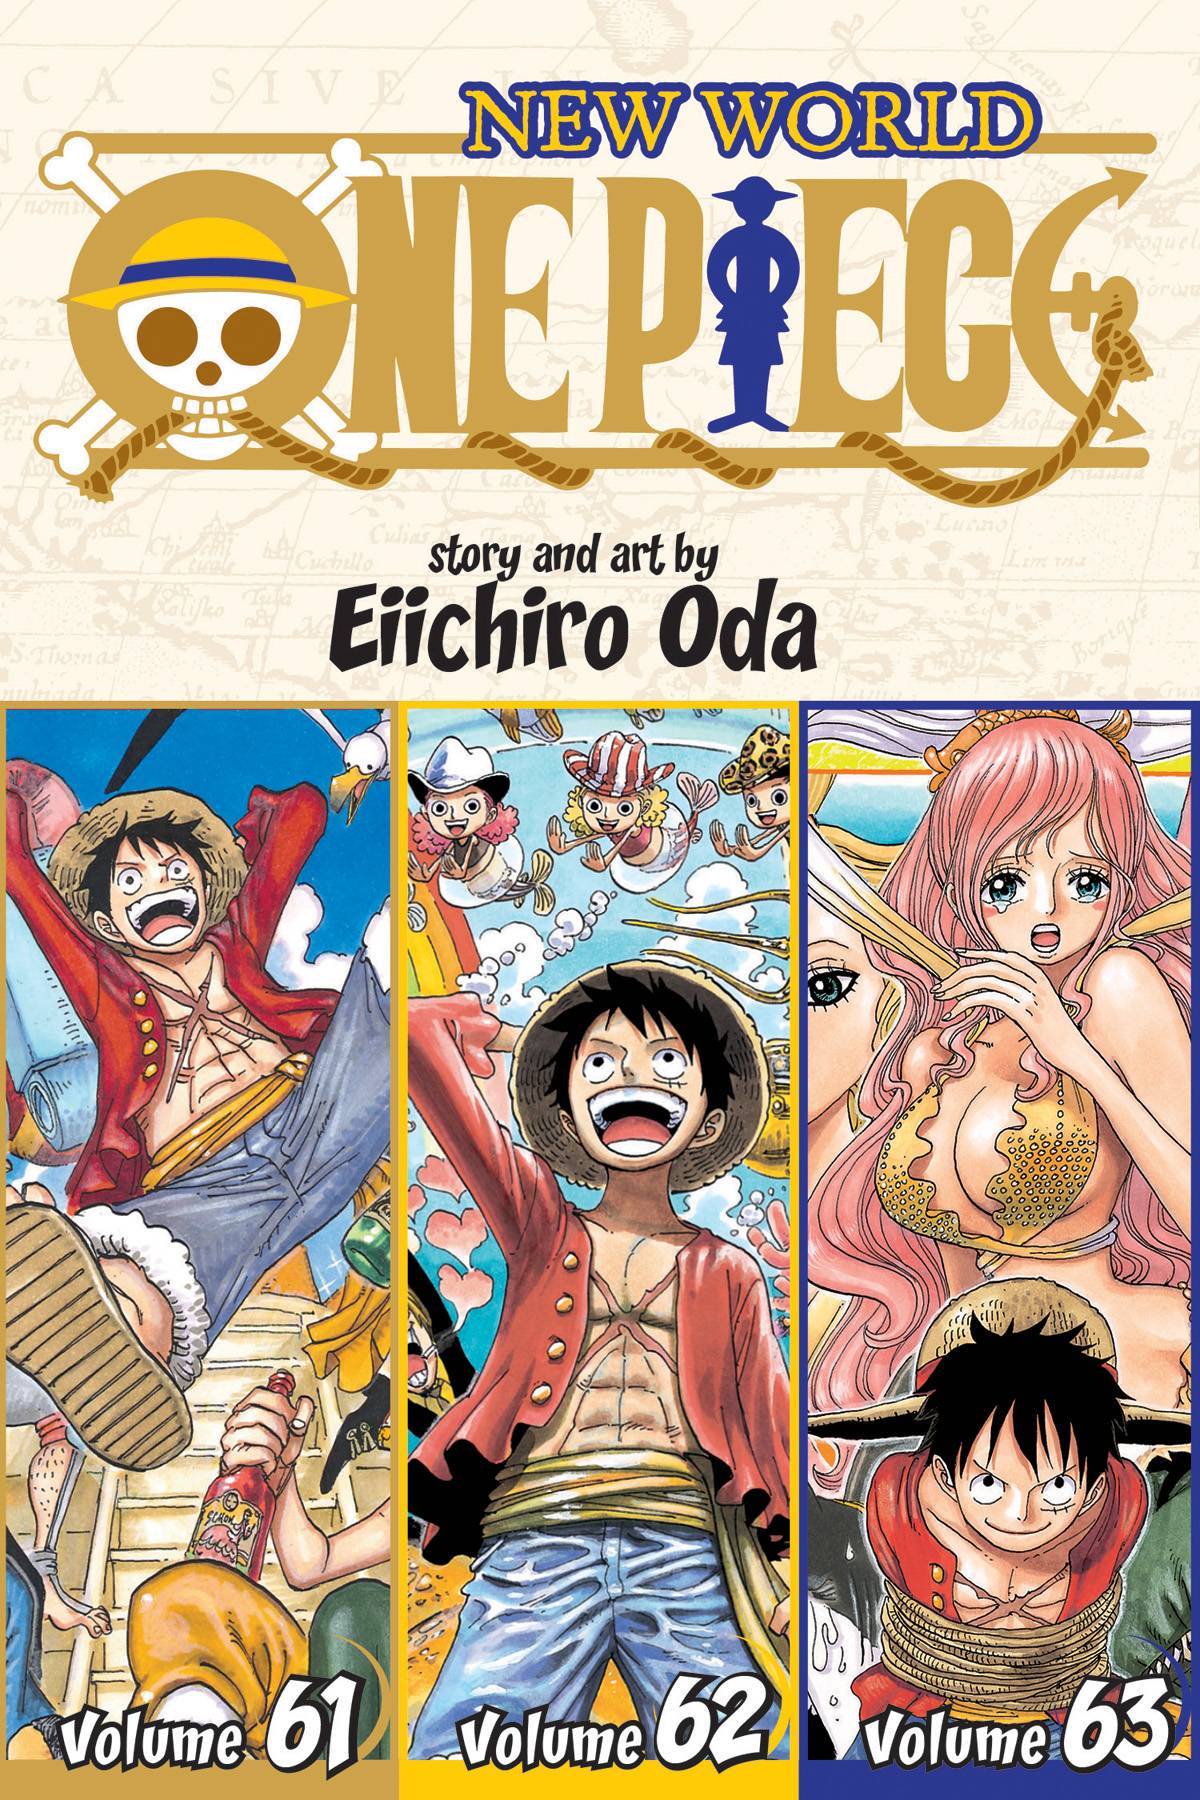 One Piece One Piece New World 3 In 1 Edition Volume 21 By Eiichiro Oda Published By Viz Media Llc Forbiddenplanet Com Uk And Worldwide Cult Entertainment Megastore